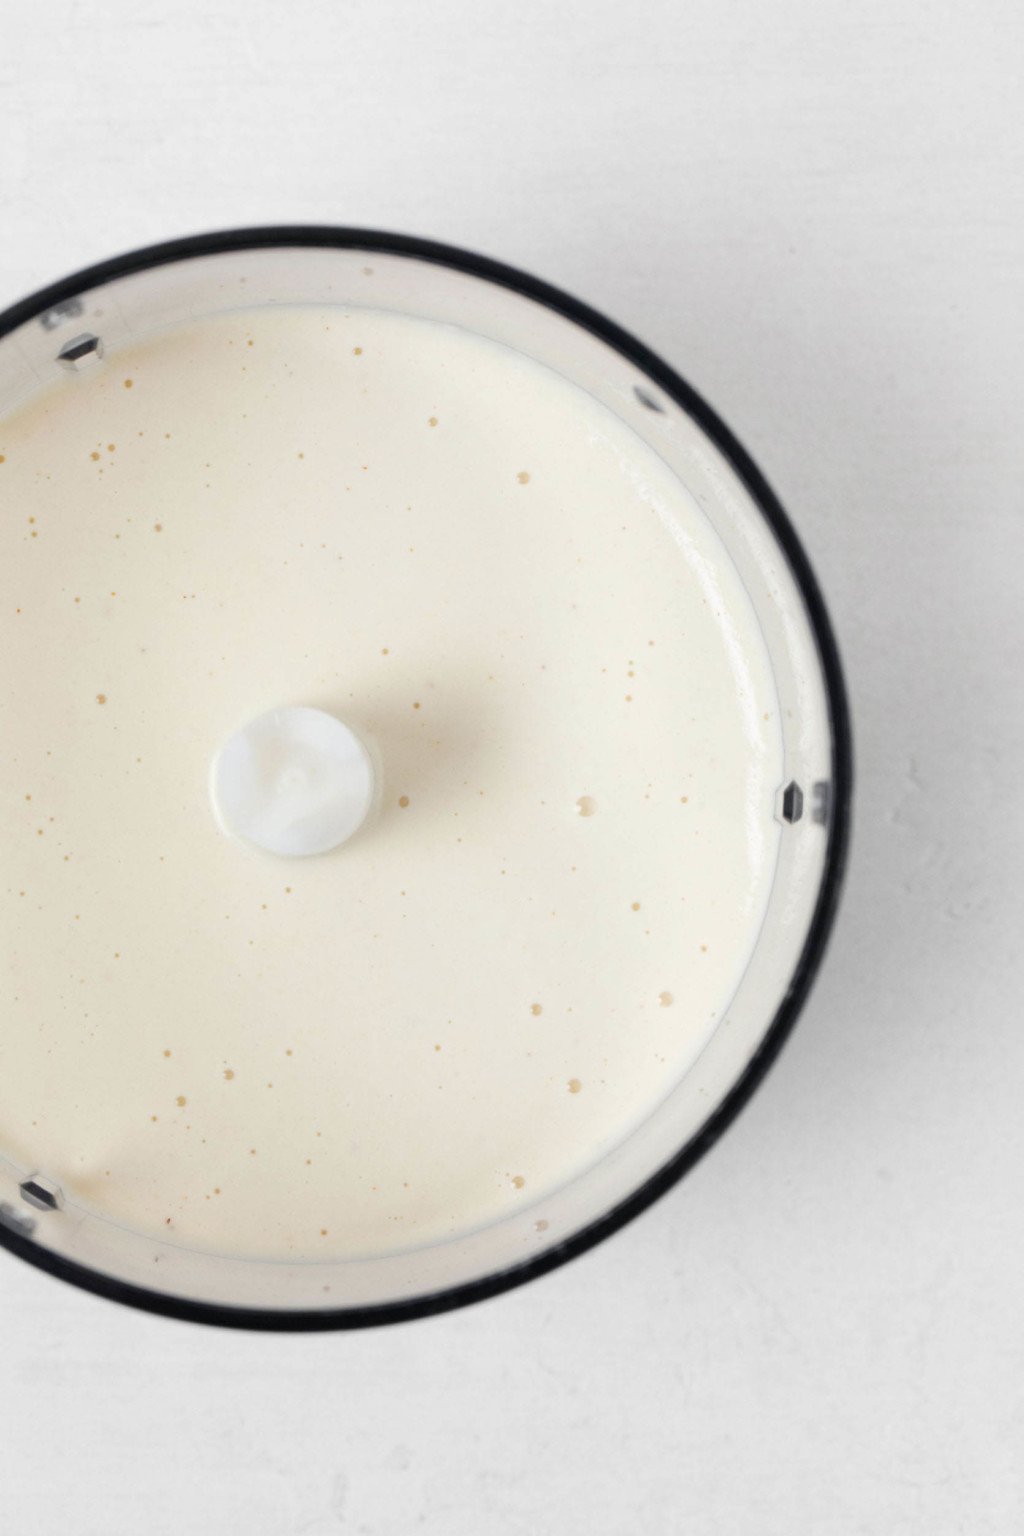 The bowl of a food processor has been filled with mayonnaise.